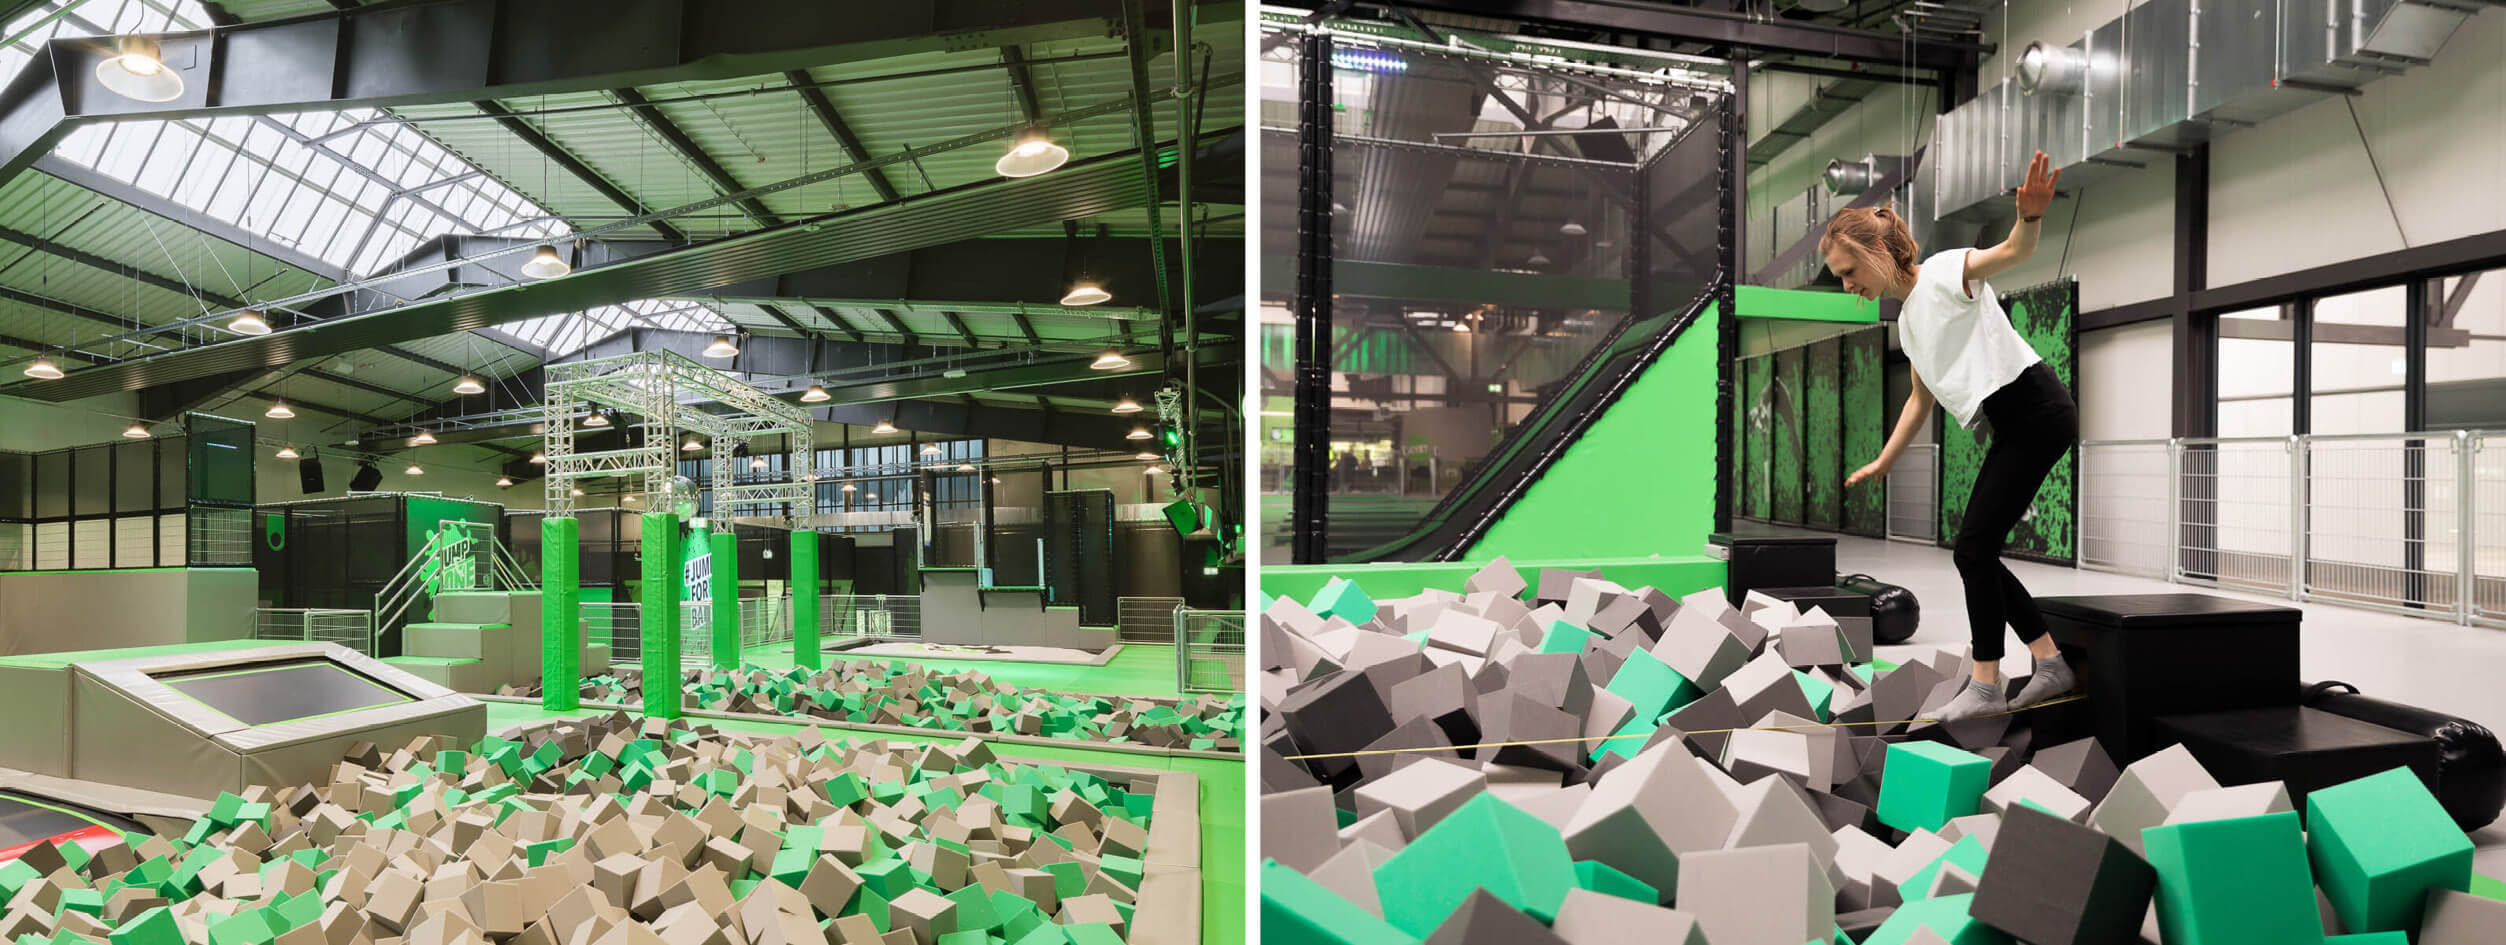 Trampolinpark Jump One Hannover